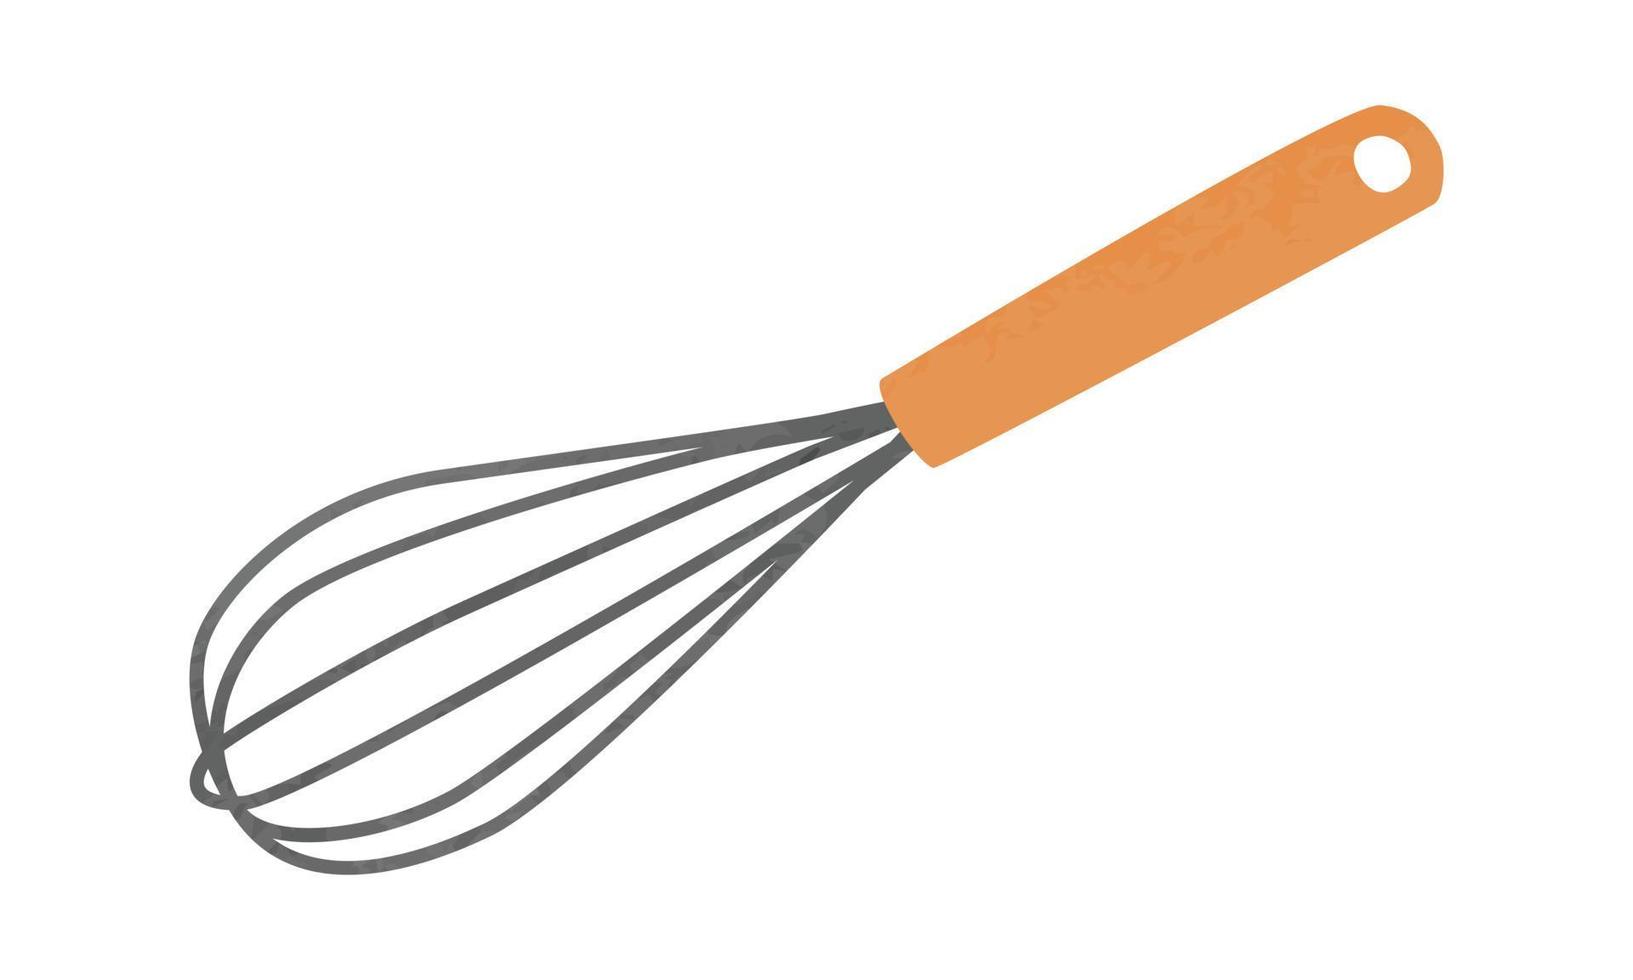 Simple whisk watercolor drawing vector illustration isolated on white background. Balloon whisk clipart. Whisk with wooden handle cartoon hand drawn. Kitchen utensils for mixing, whisking, cooking egg